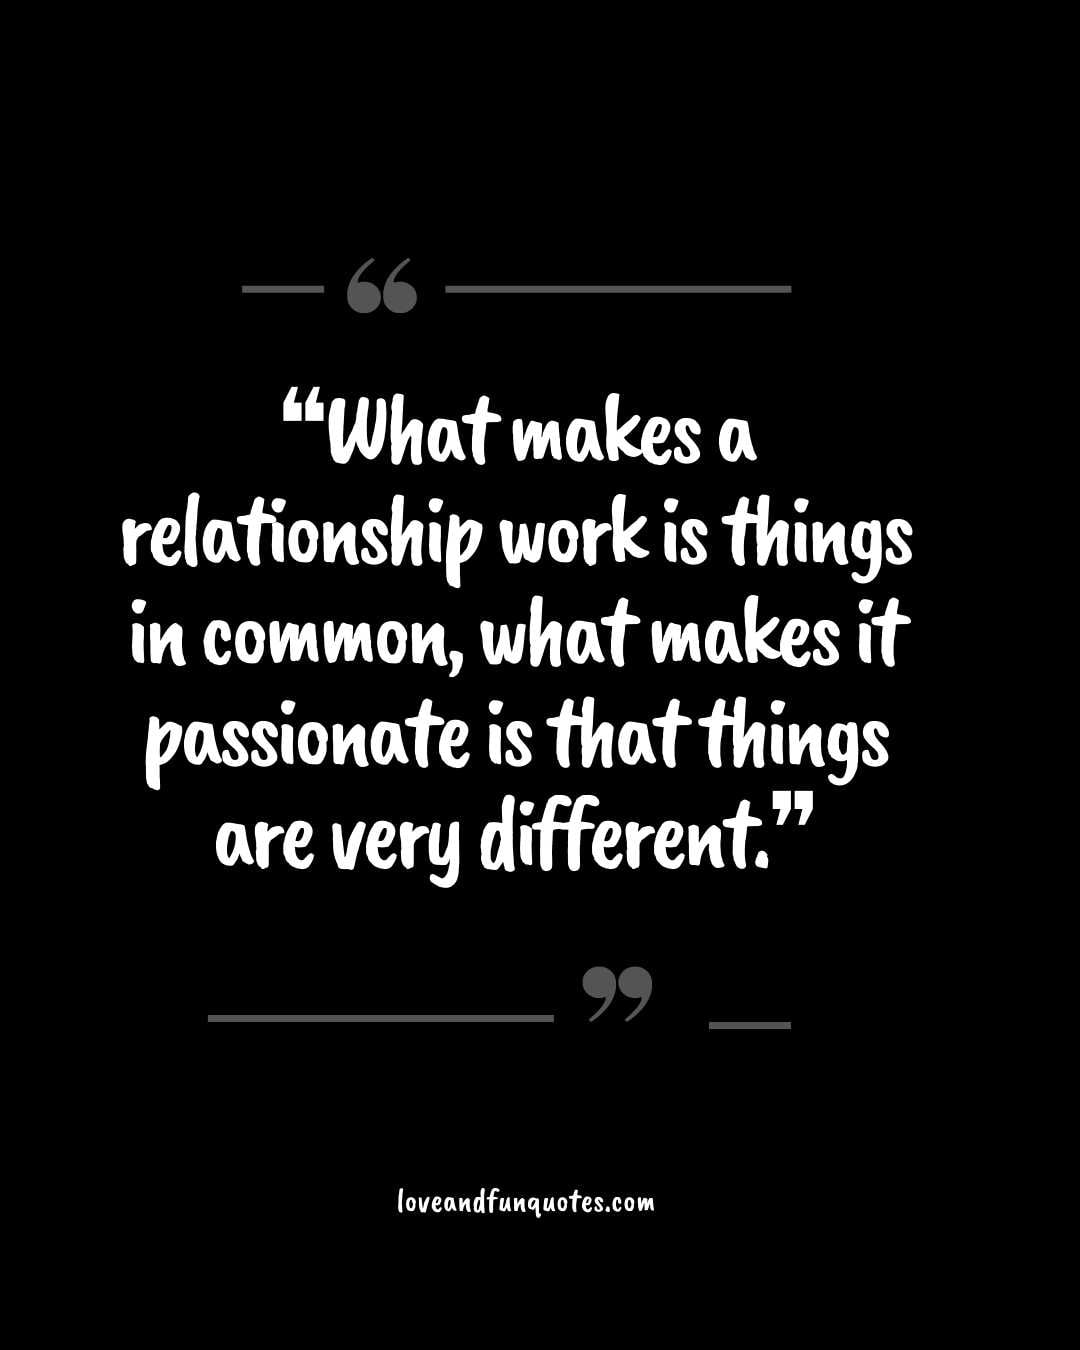 ❝What makes a relationship work is things in common, what makes it passionate is that things are very different.❞